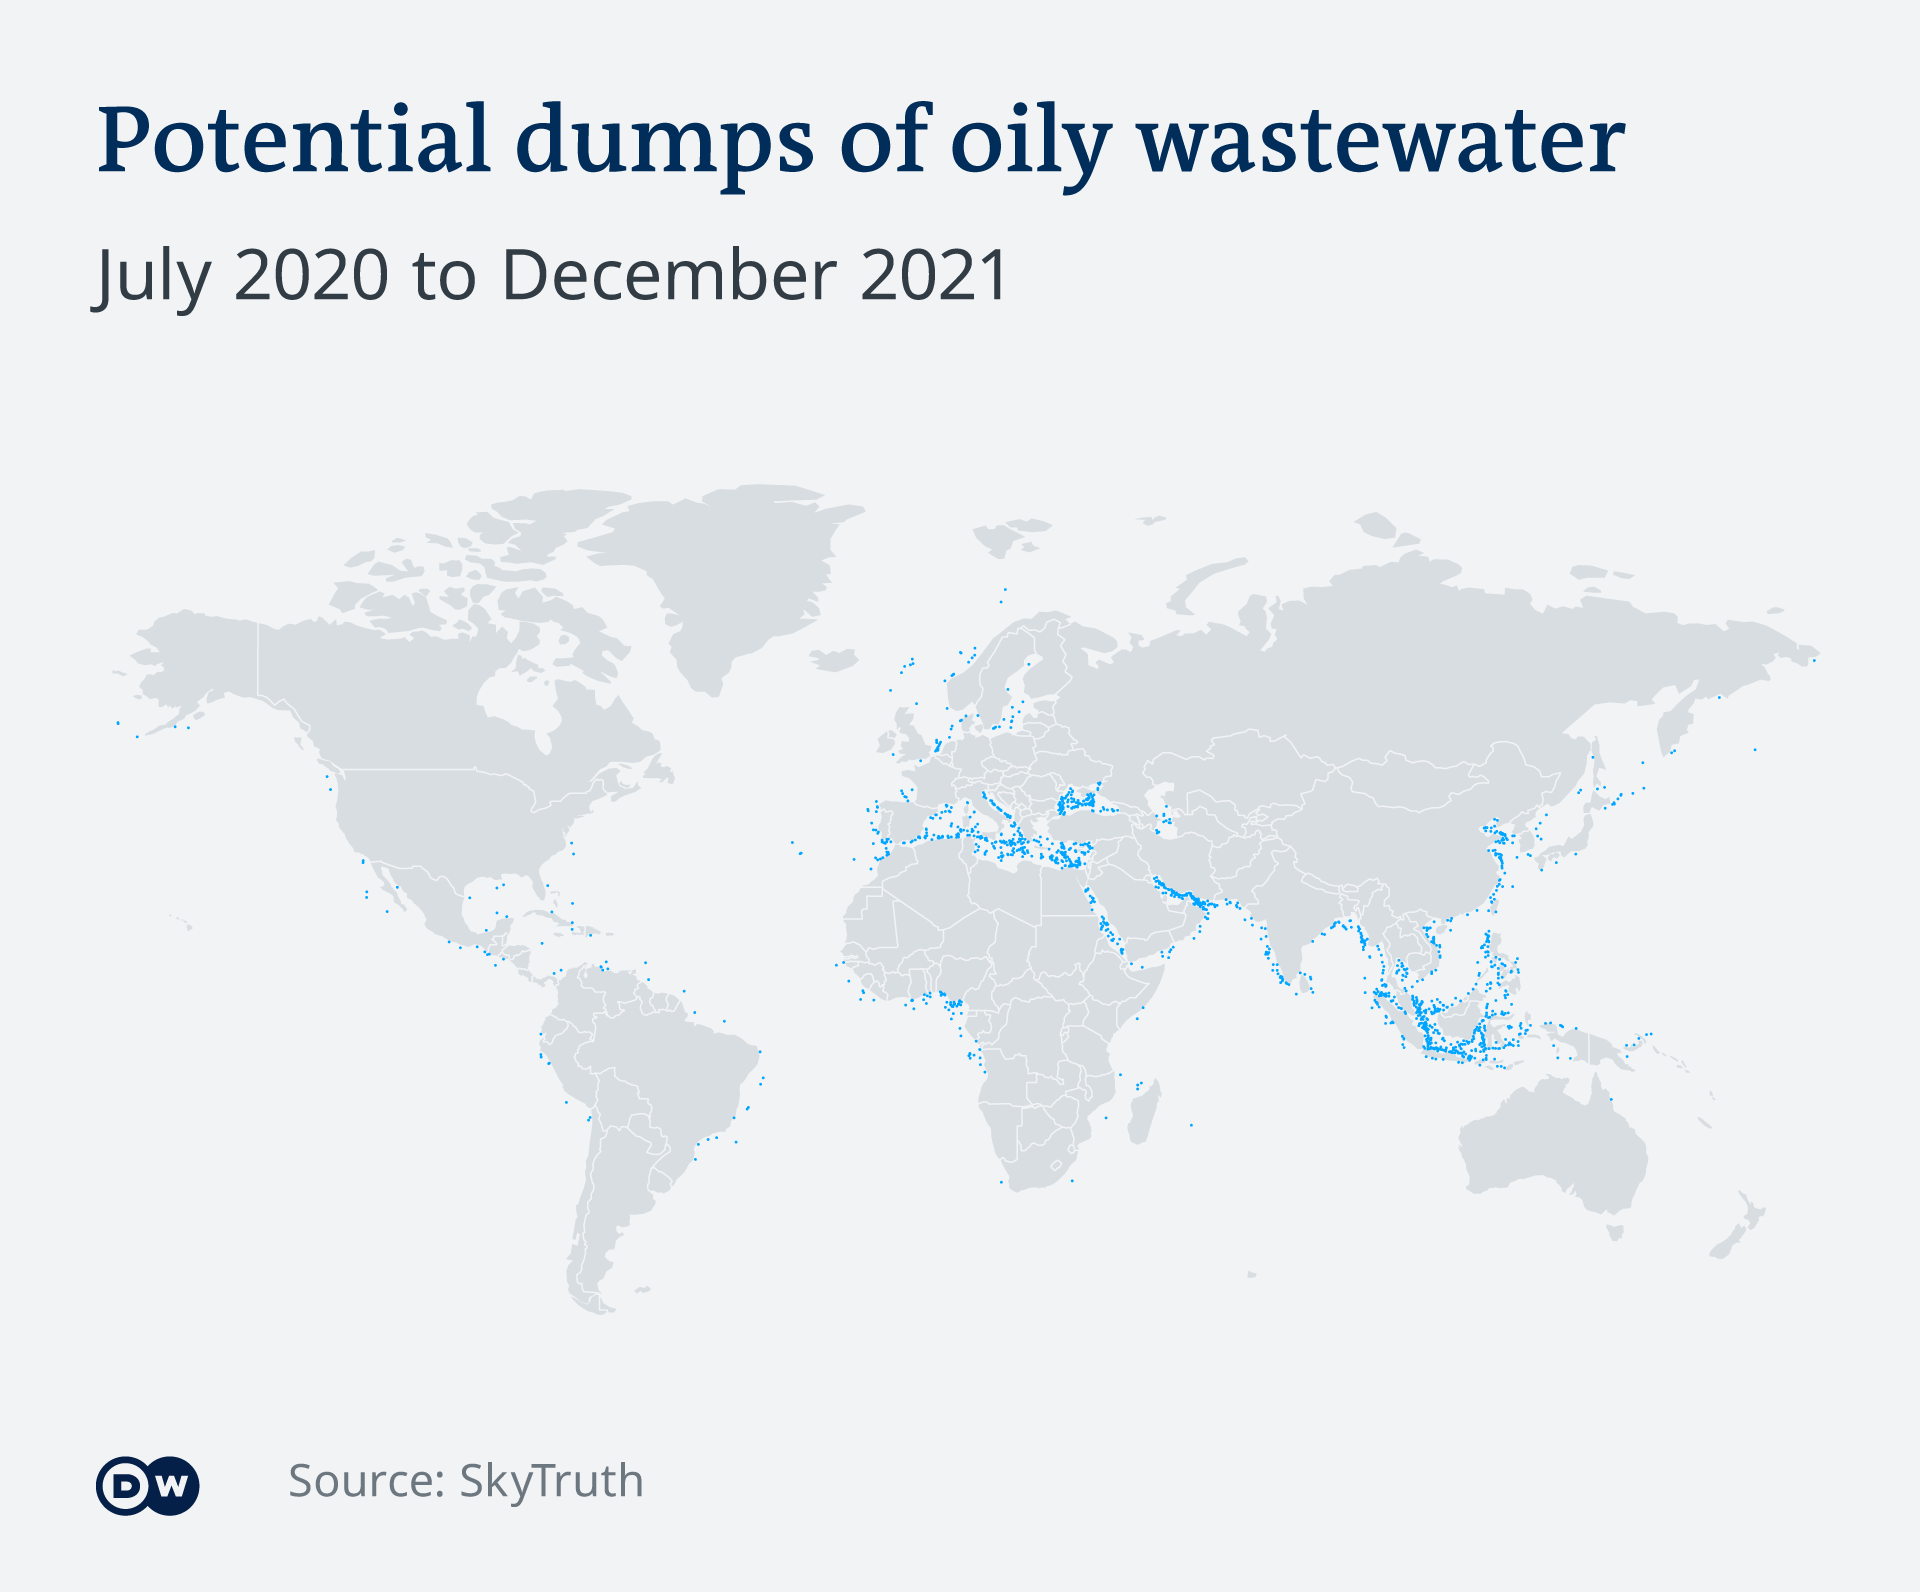 Map shows the sites of potential dumps of oily wastewater